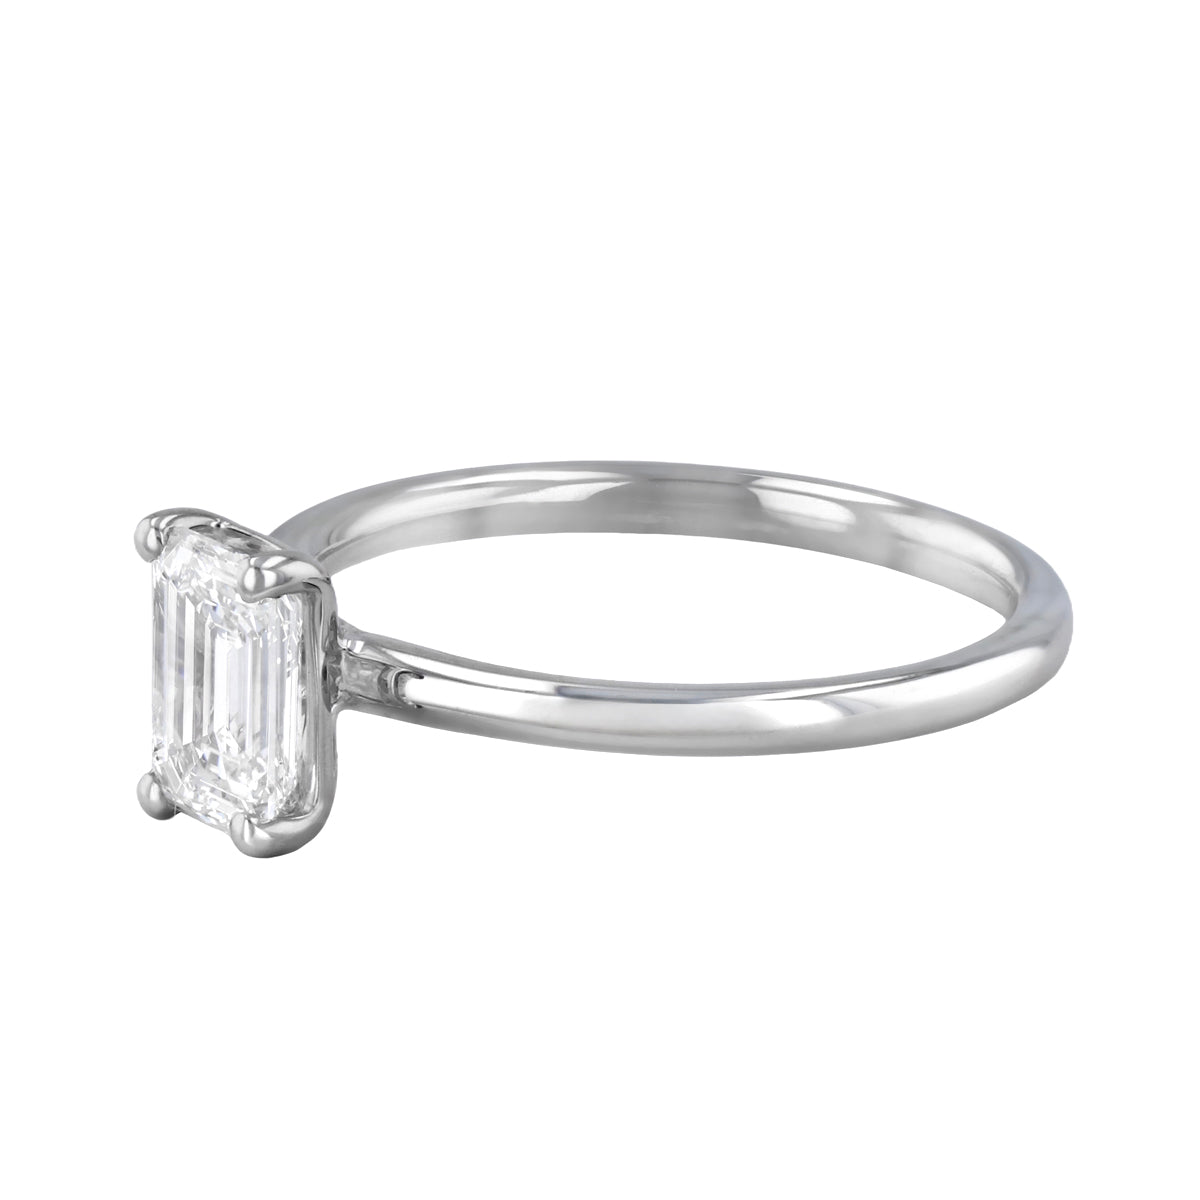 0-25ct-sofia-emerald-cut-solitaire-diamond-engagement-ring-18ct-white-gold